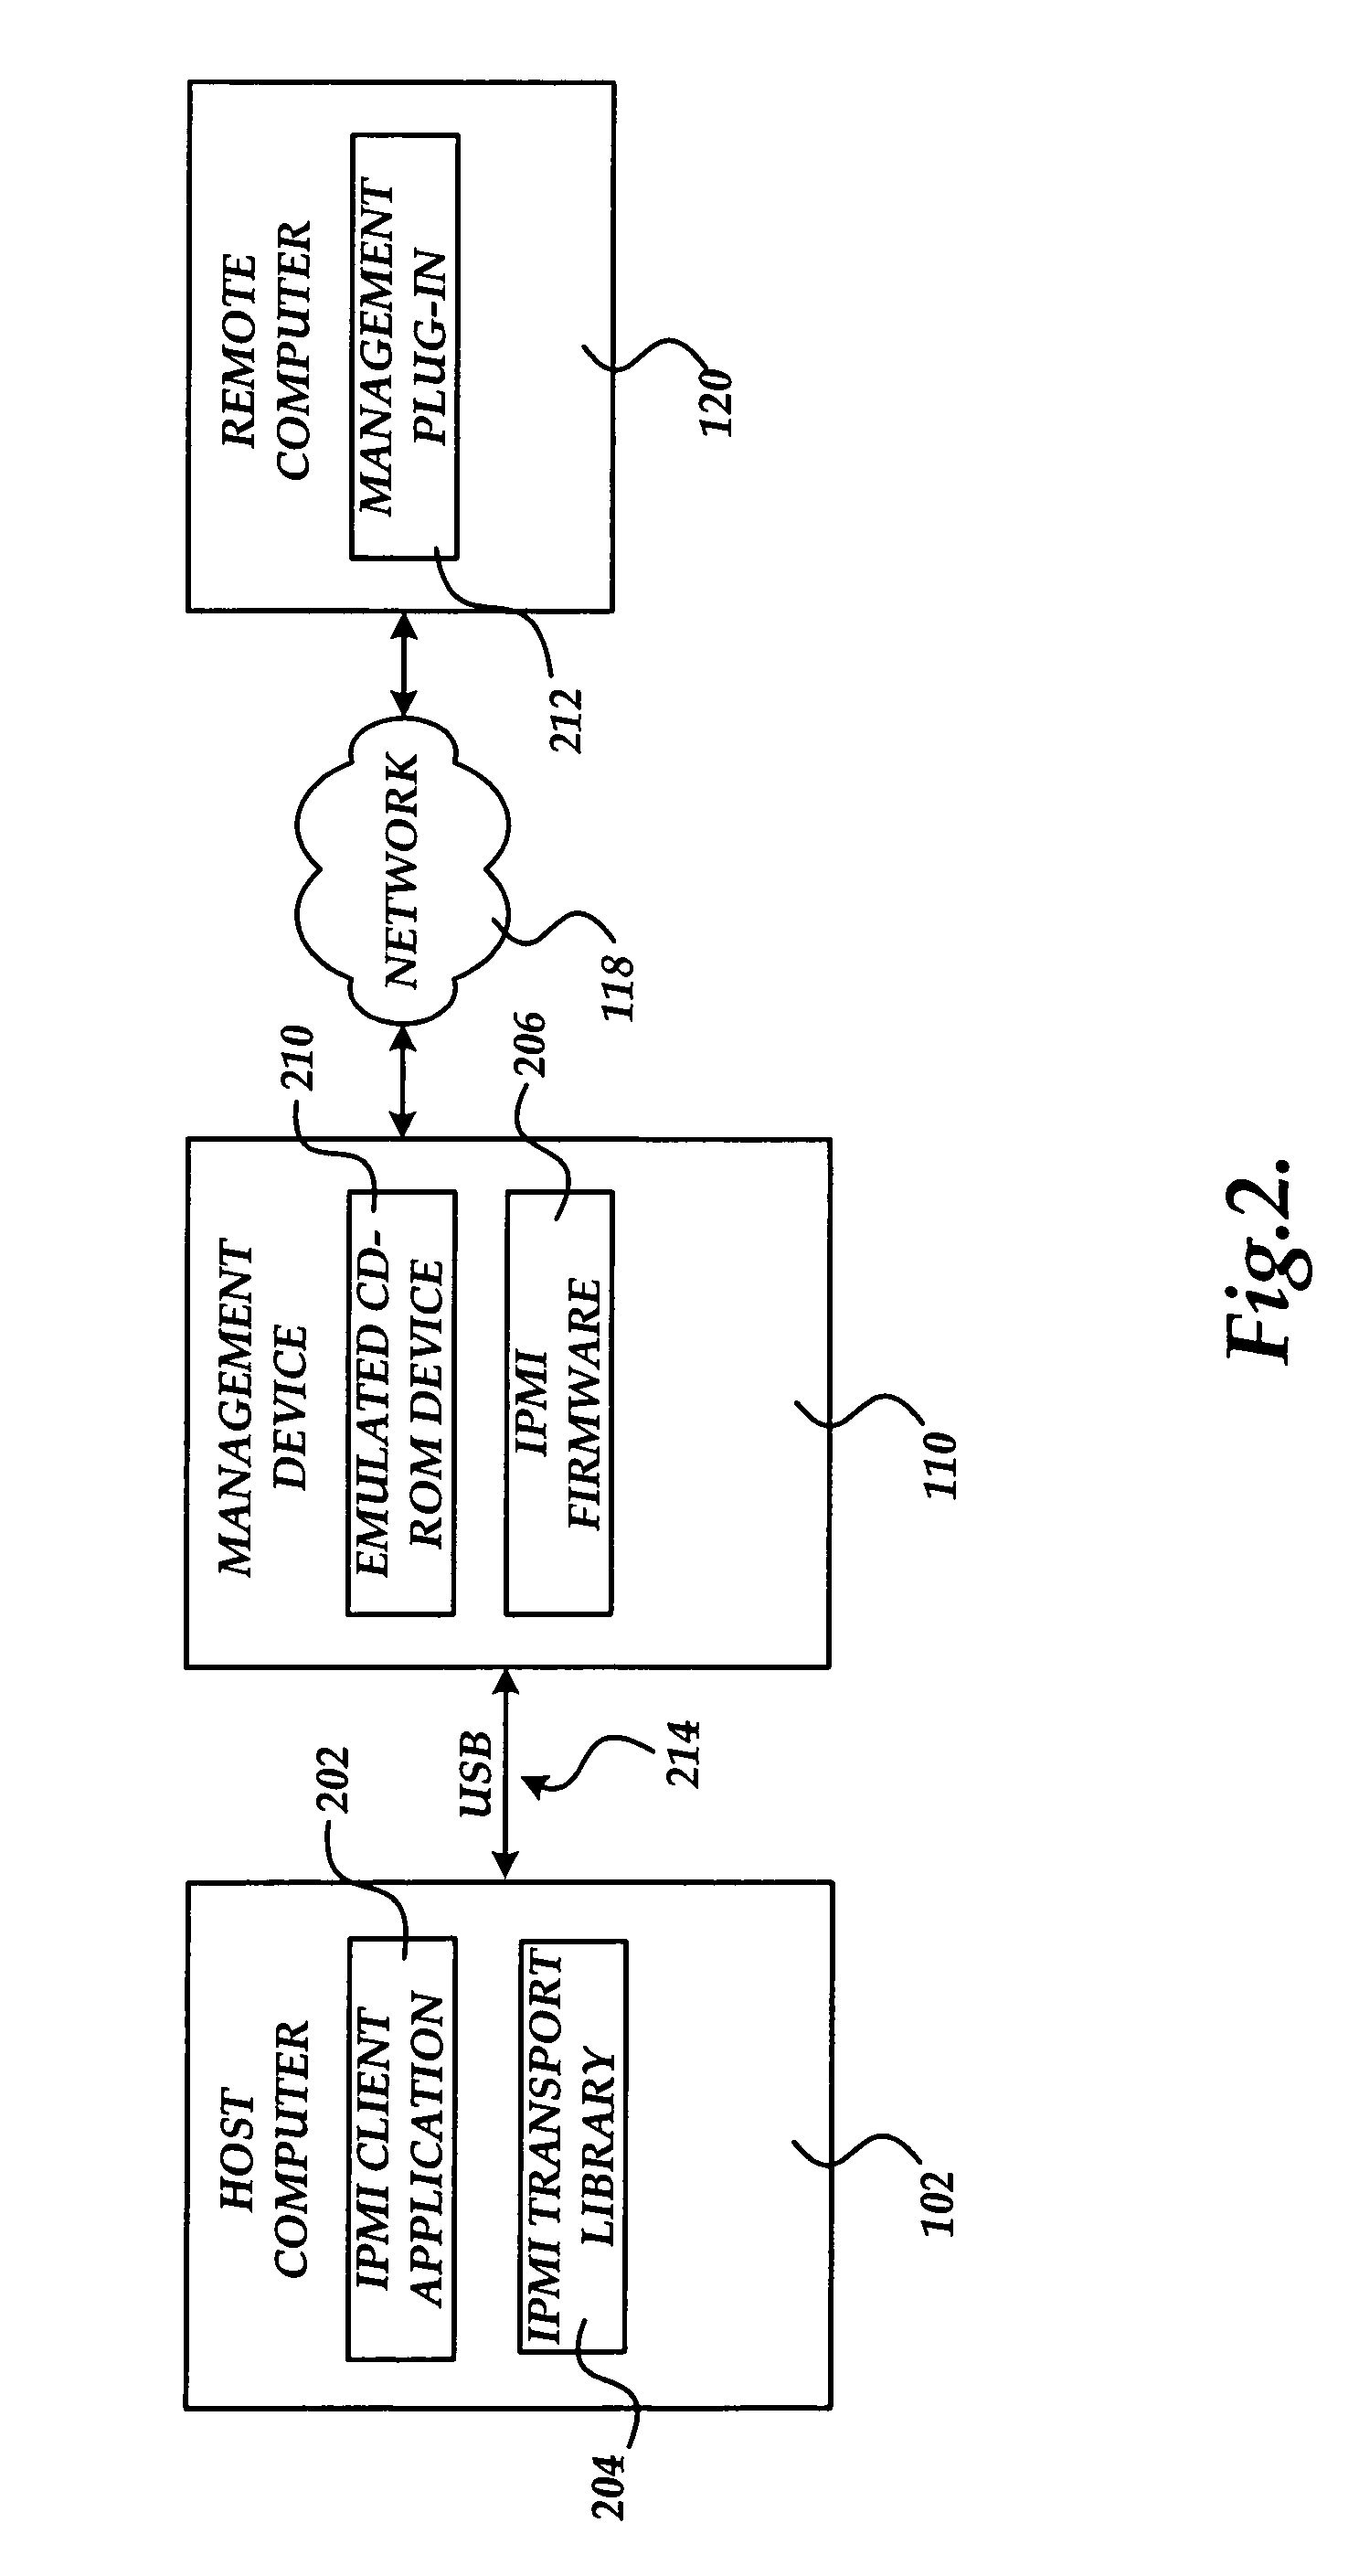 Universal serial bus system interface for intelligent platform management interface communications